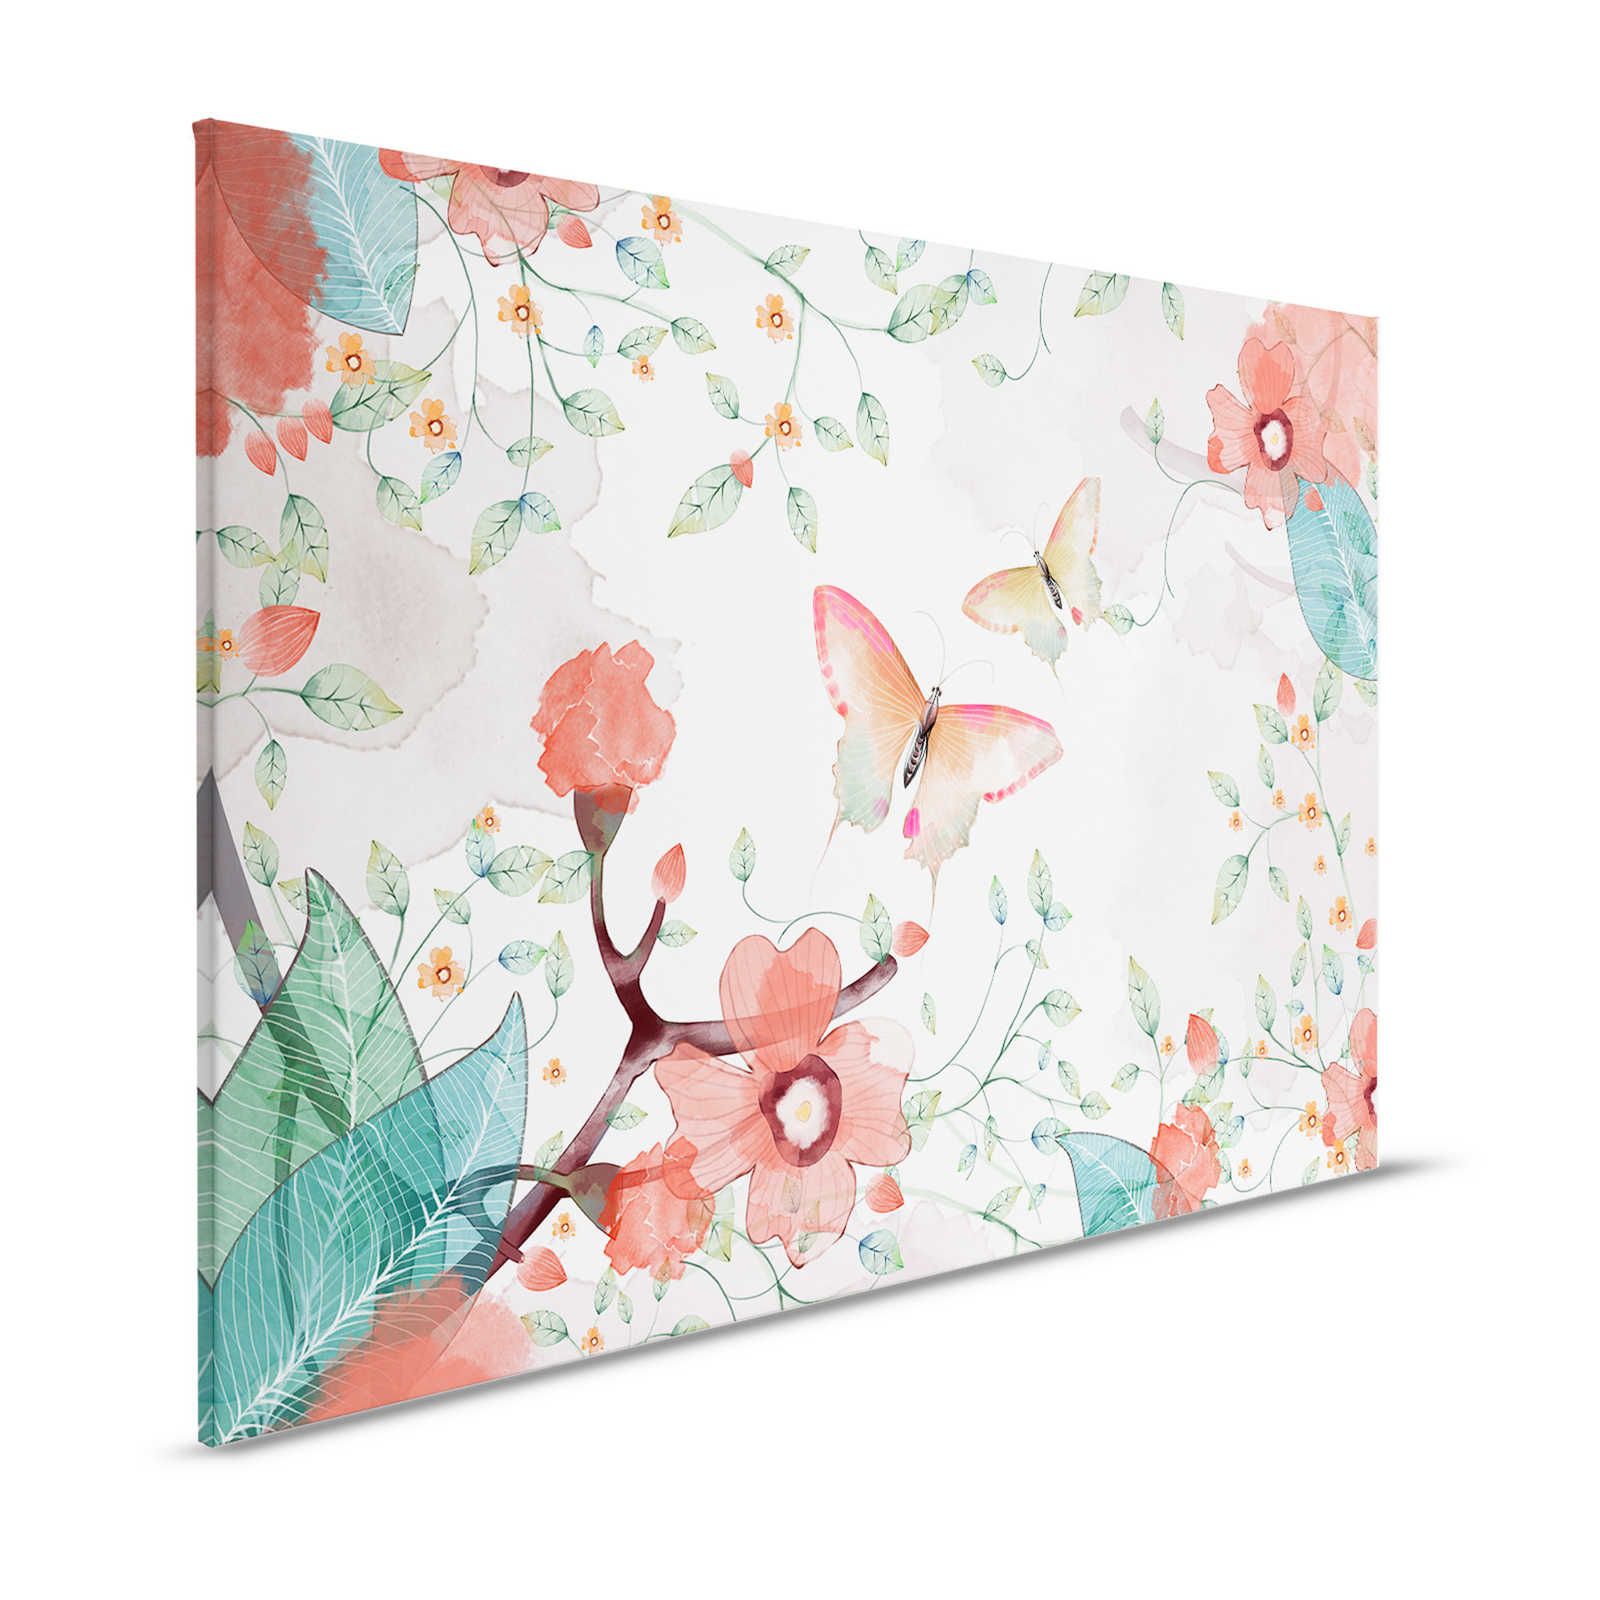 Canvas floral with leaves and butterflies - 120 cm x 80 cm
